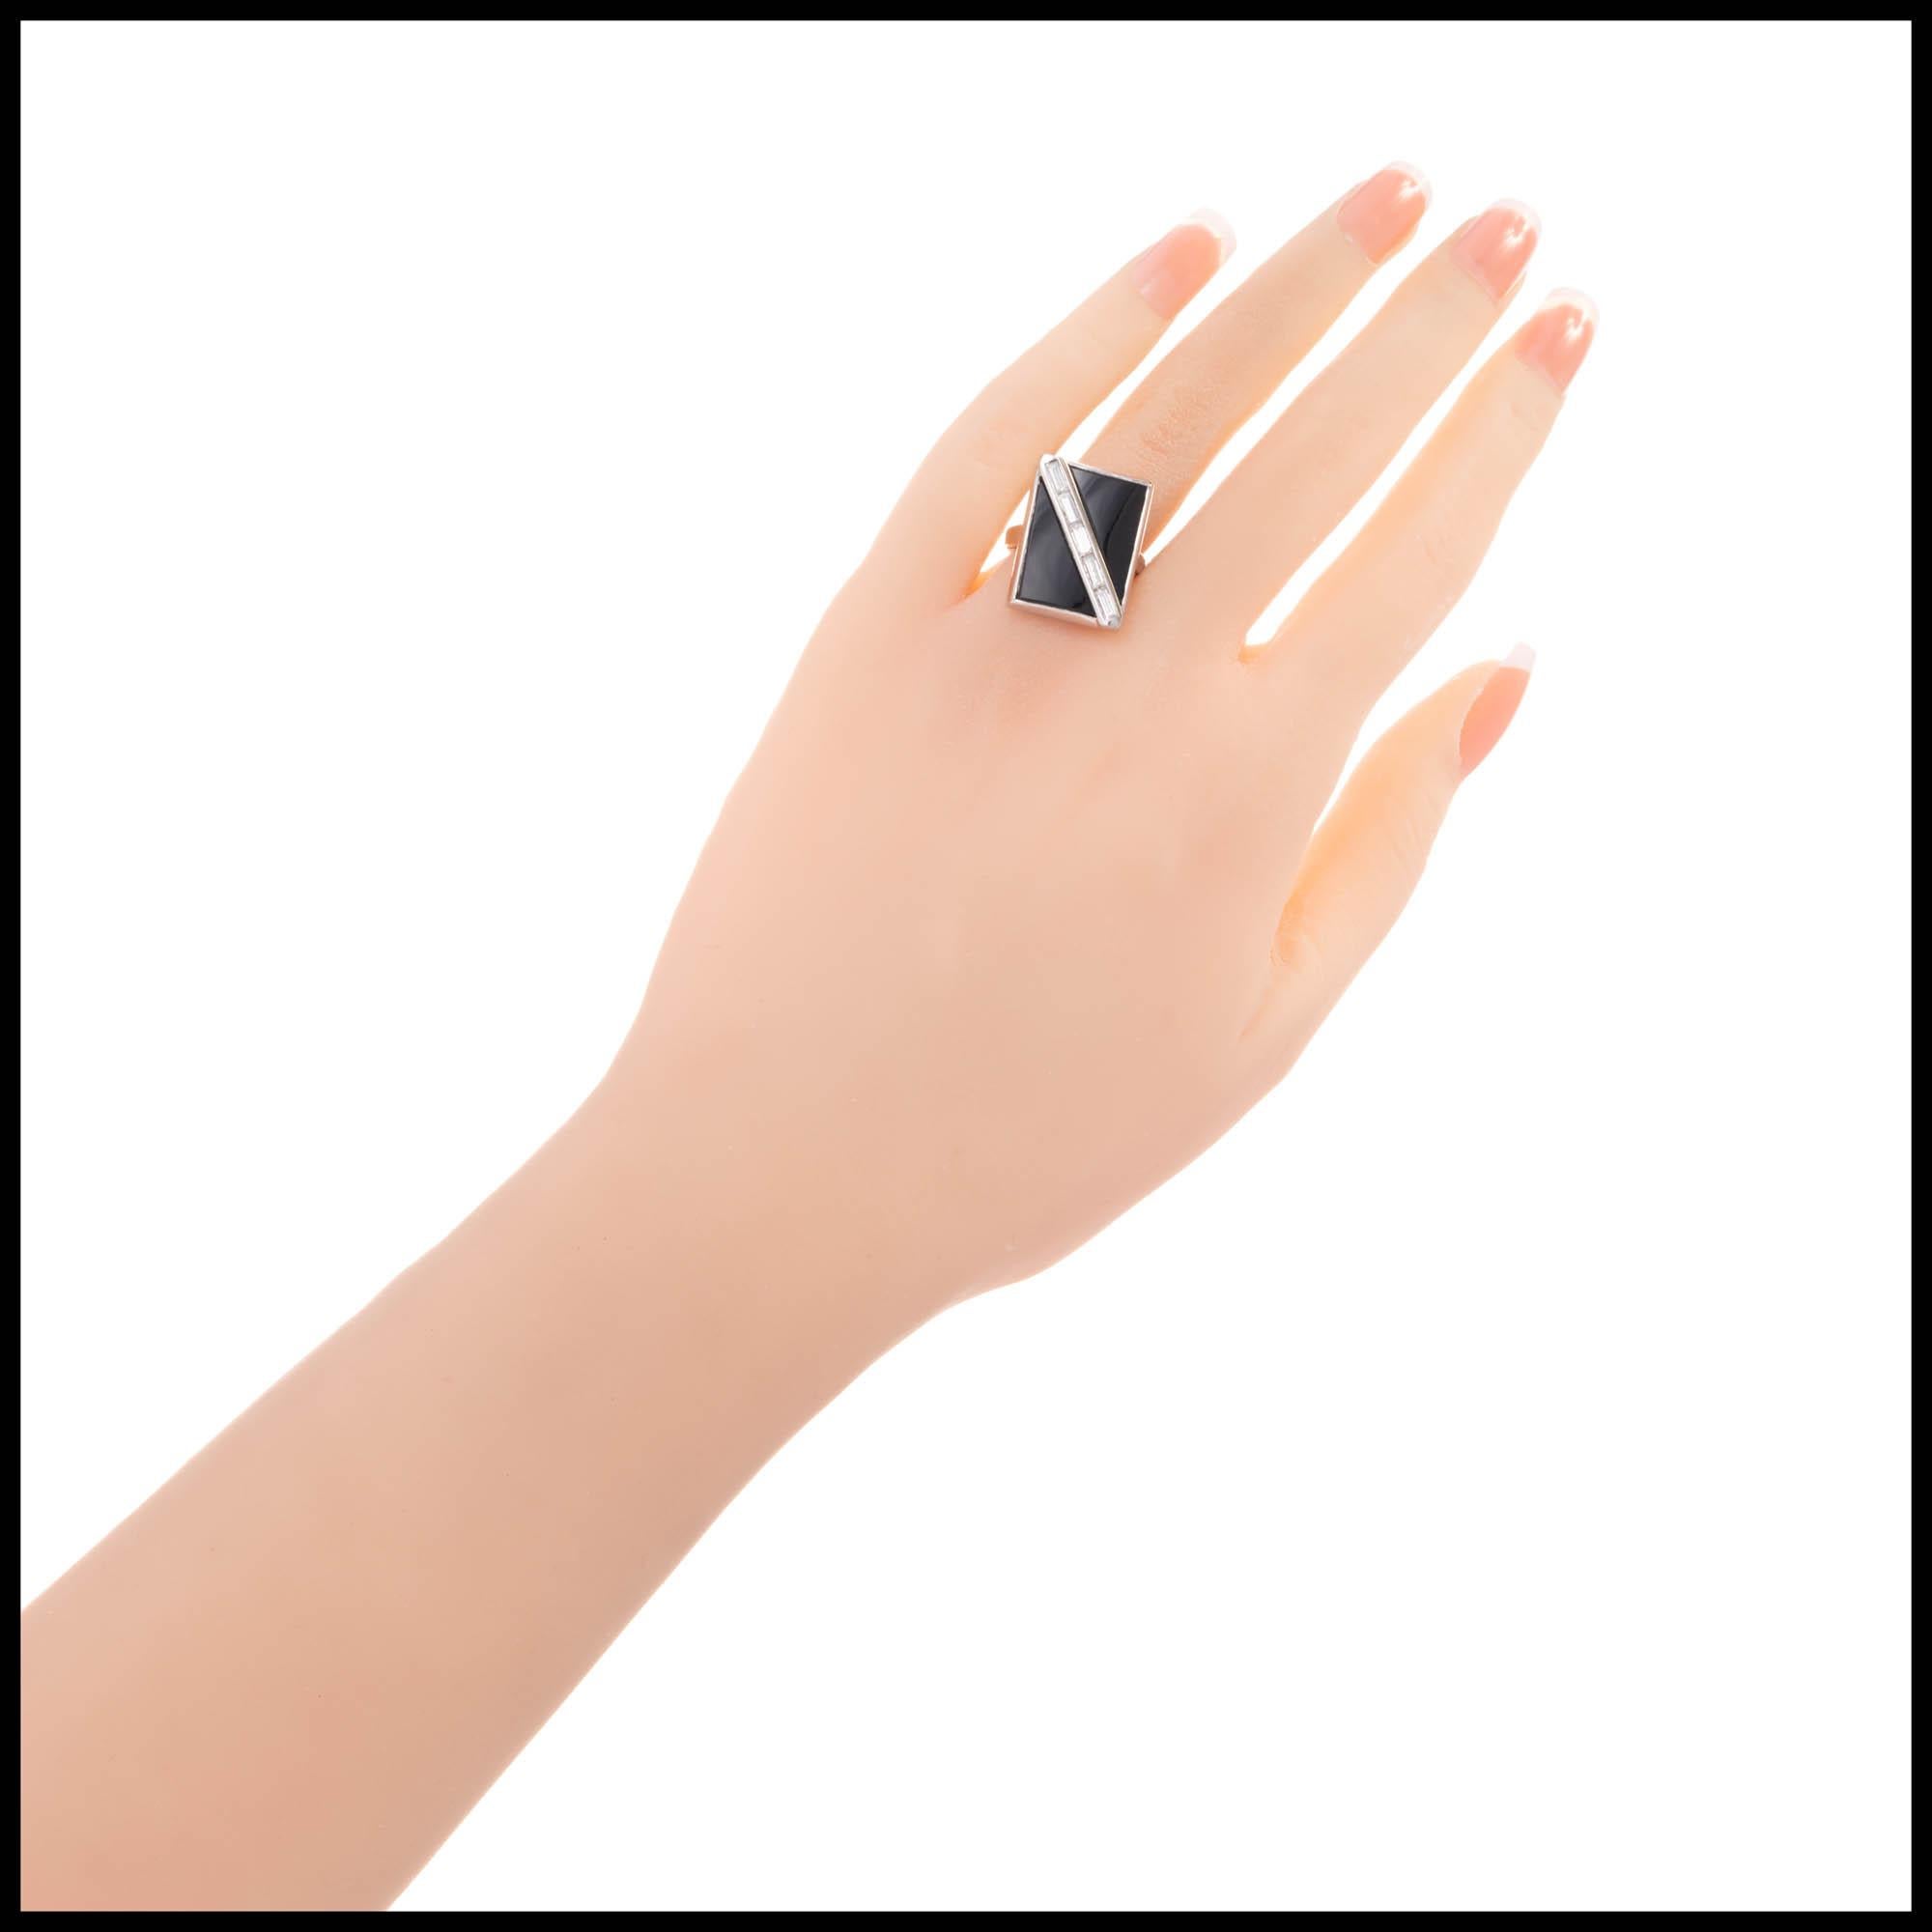 Vintage black onyx and diamond ring. Triangular cut black onyx facing each other with a diagonal row of baguette diamonds set in between the onyx all in a 14k white gold setting.

2 triangular cut black onyx 14 x 9 mm
5 baguette I-J VS diamonds